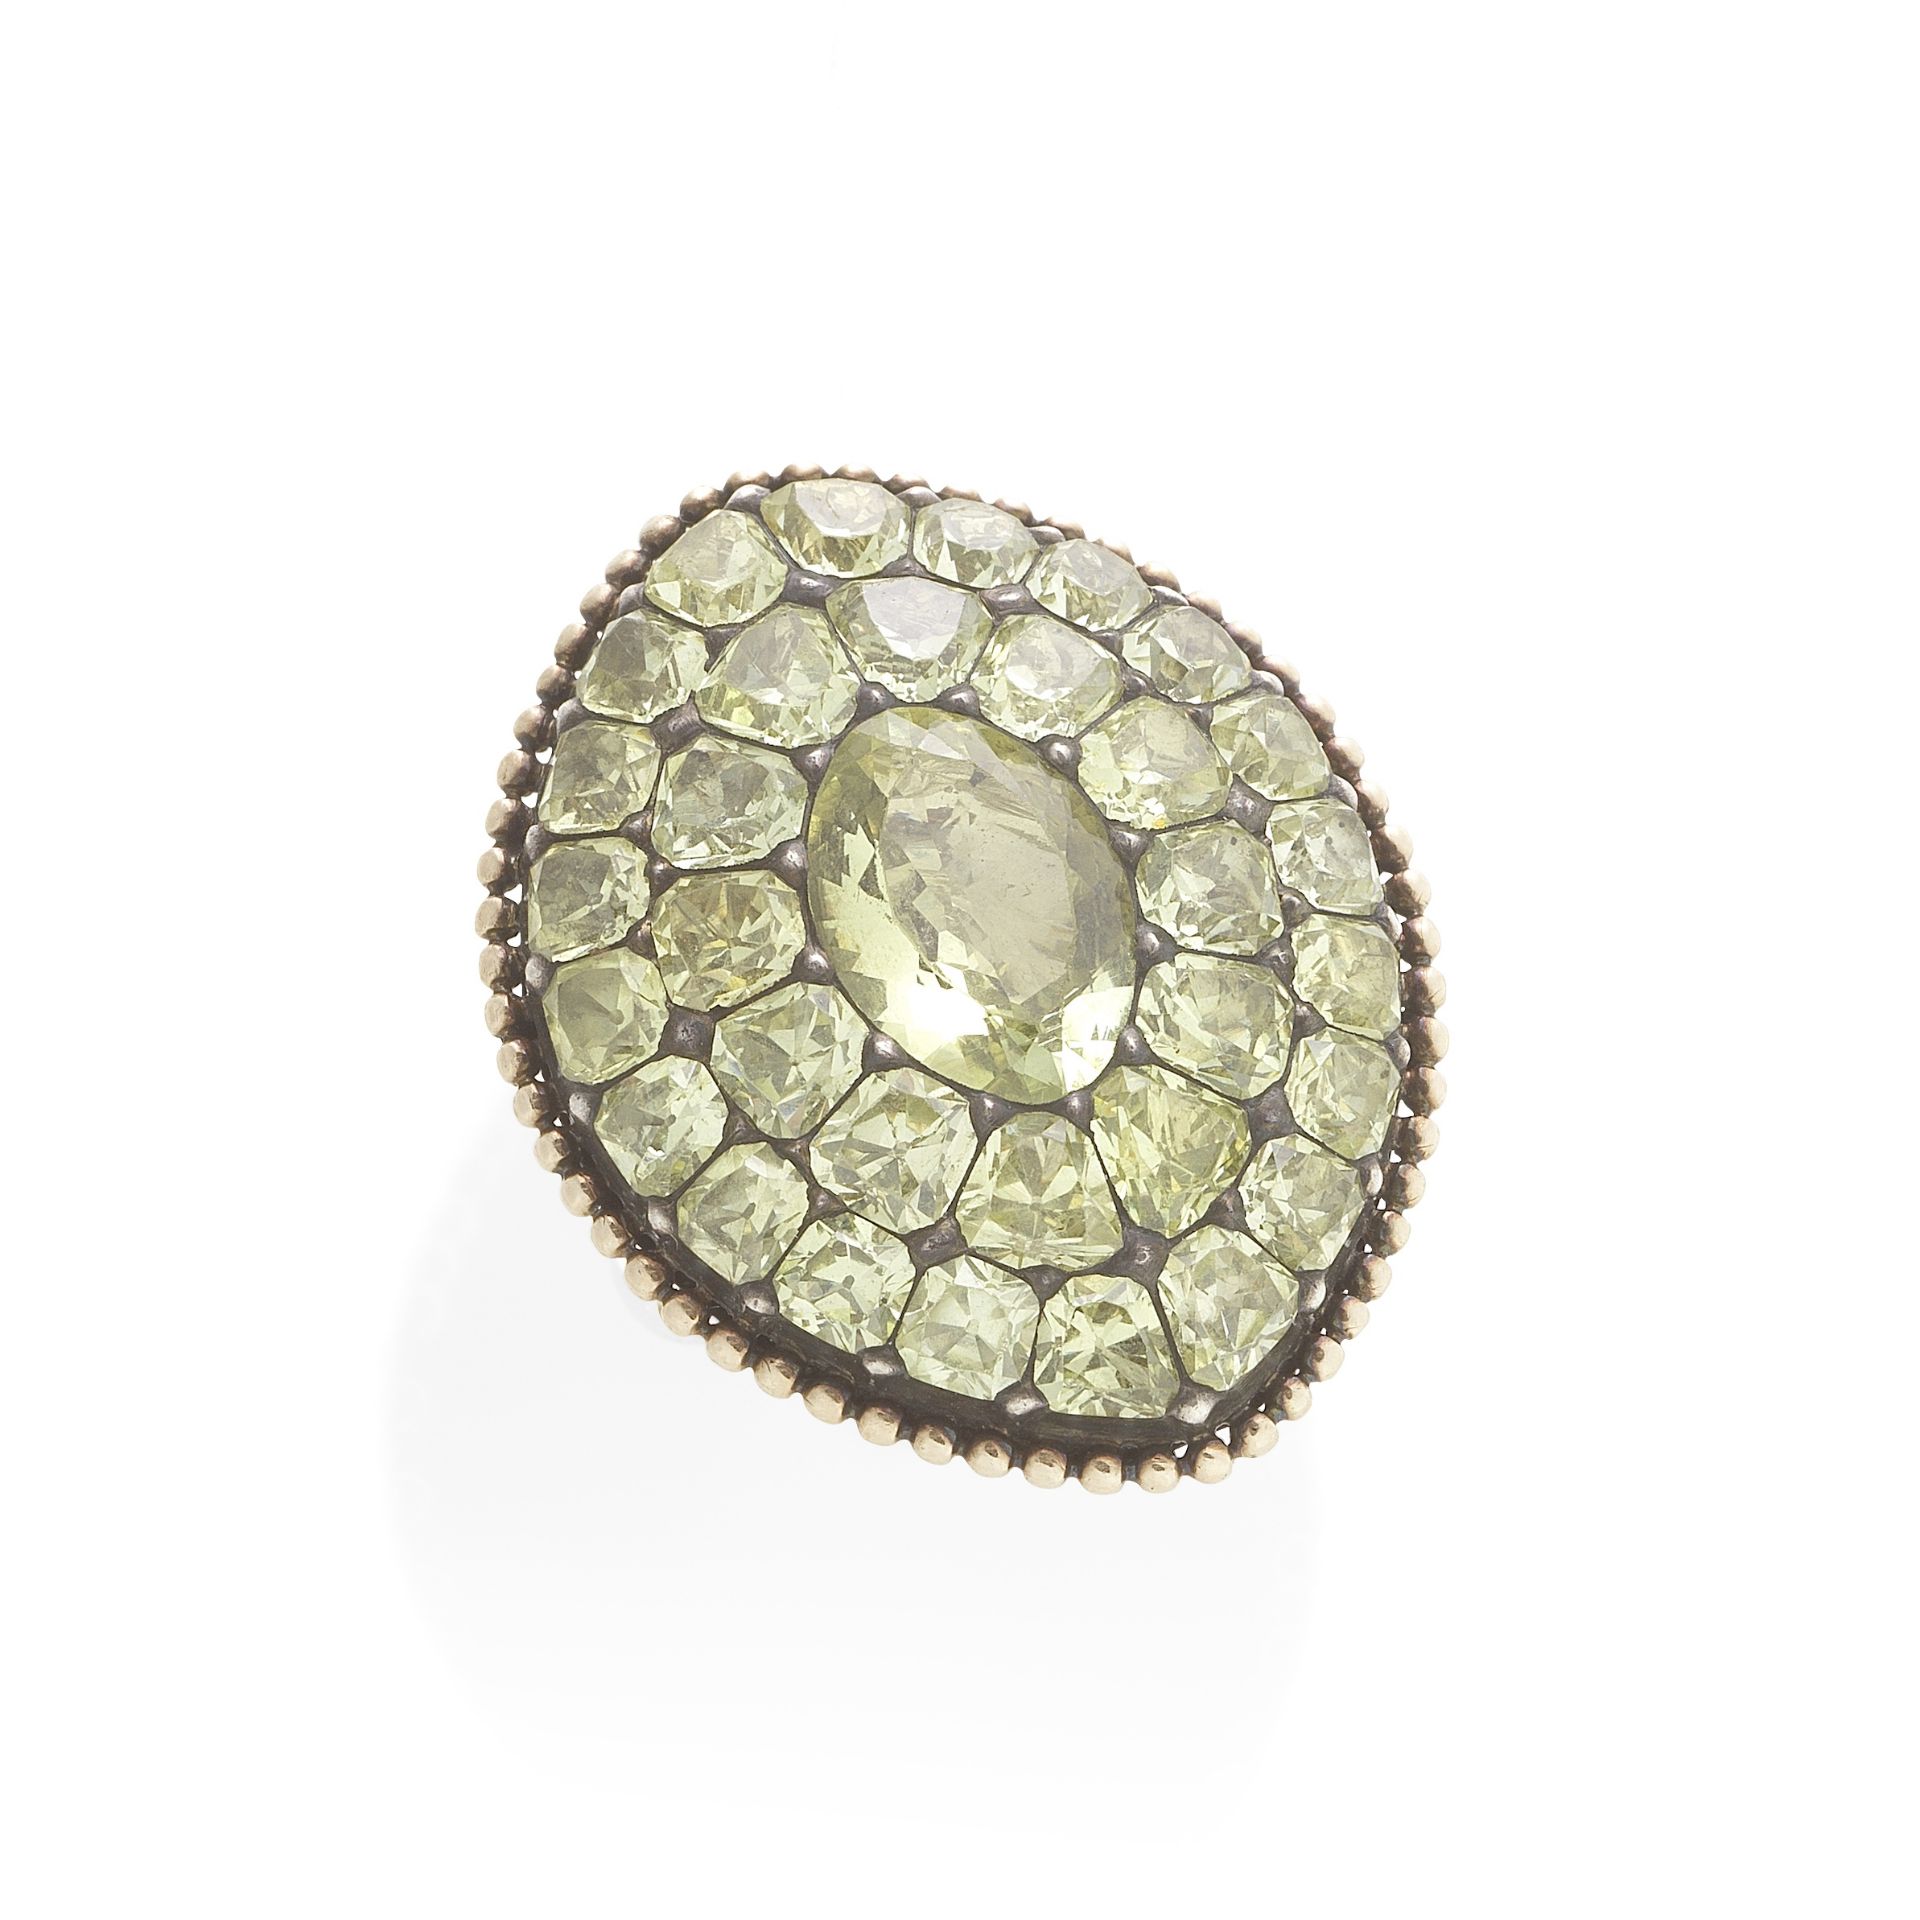 CHRYSOBERYL PLAQUE RING, PORTUGUESE, LATE 18TH CENTURY